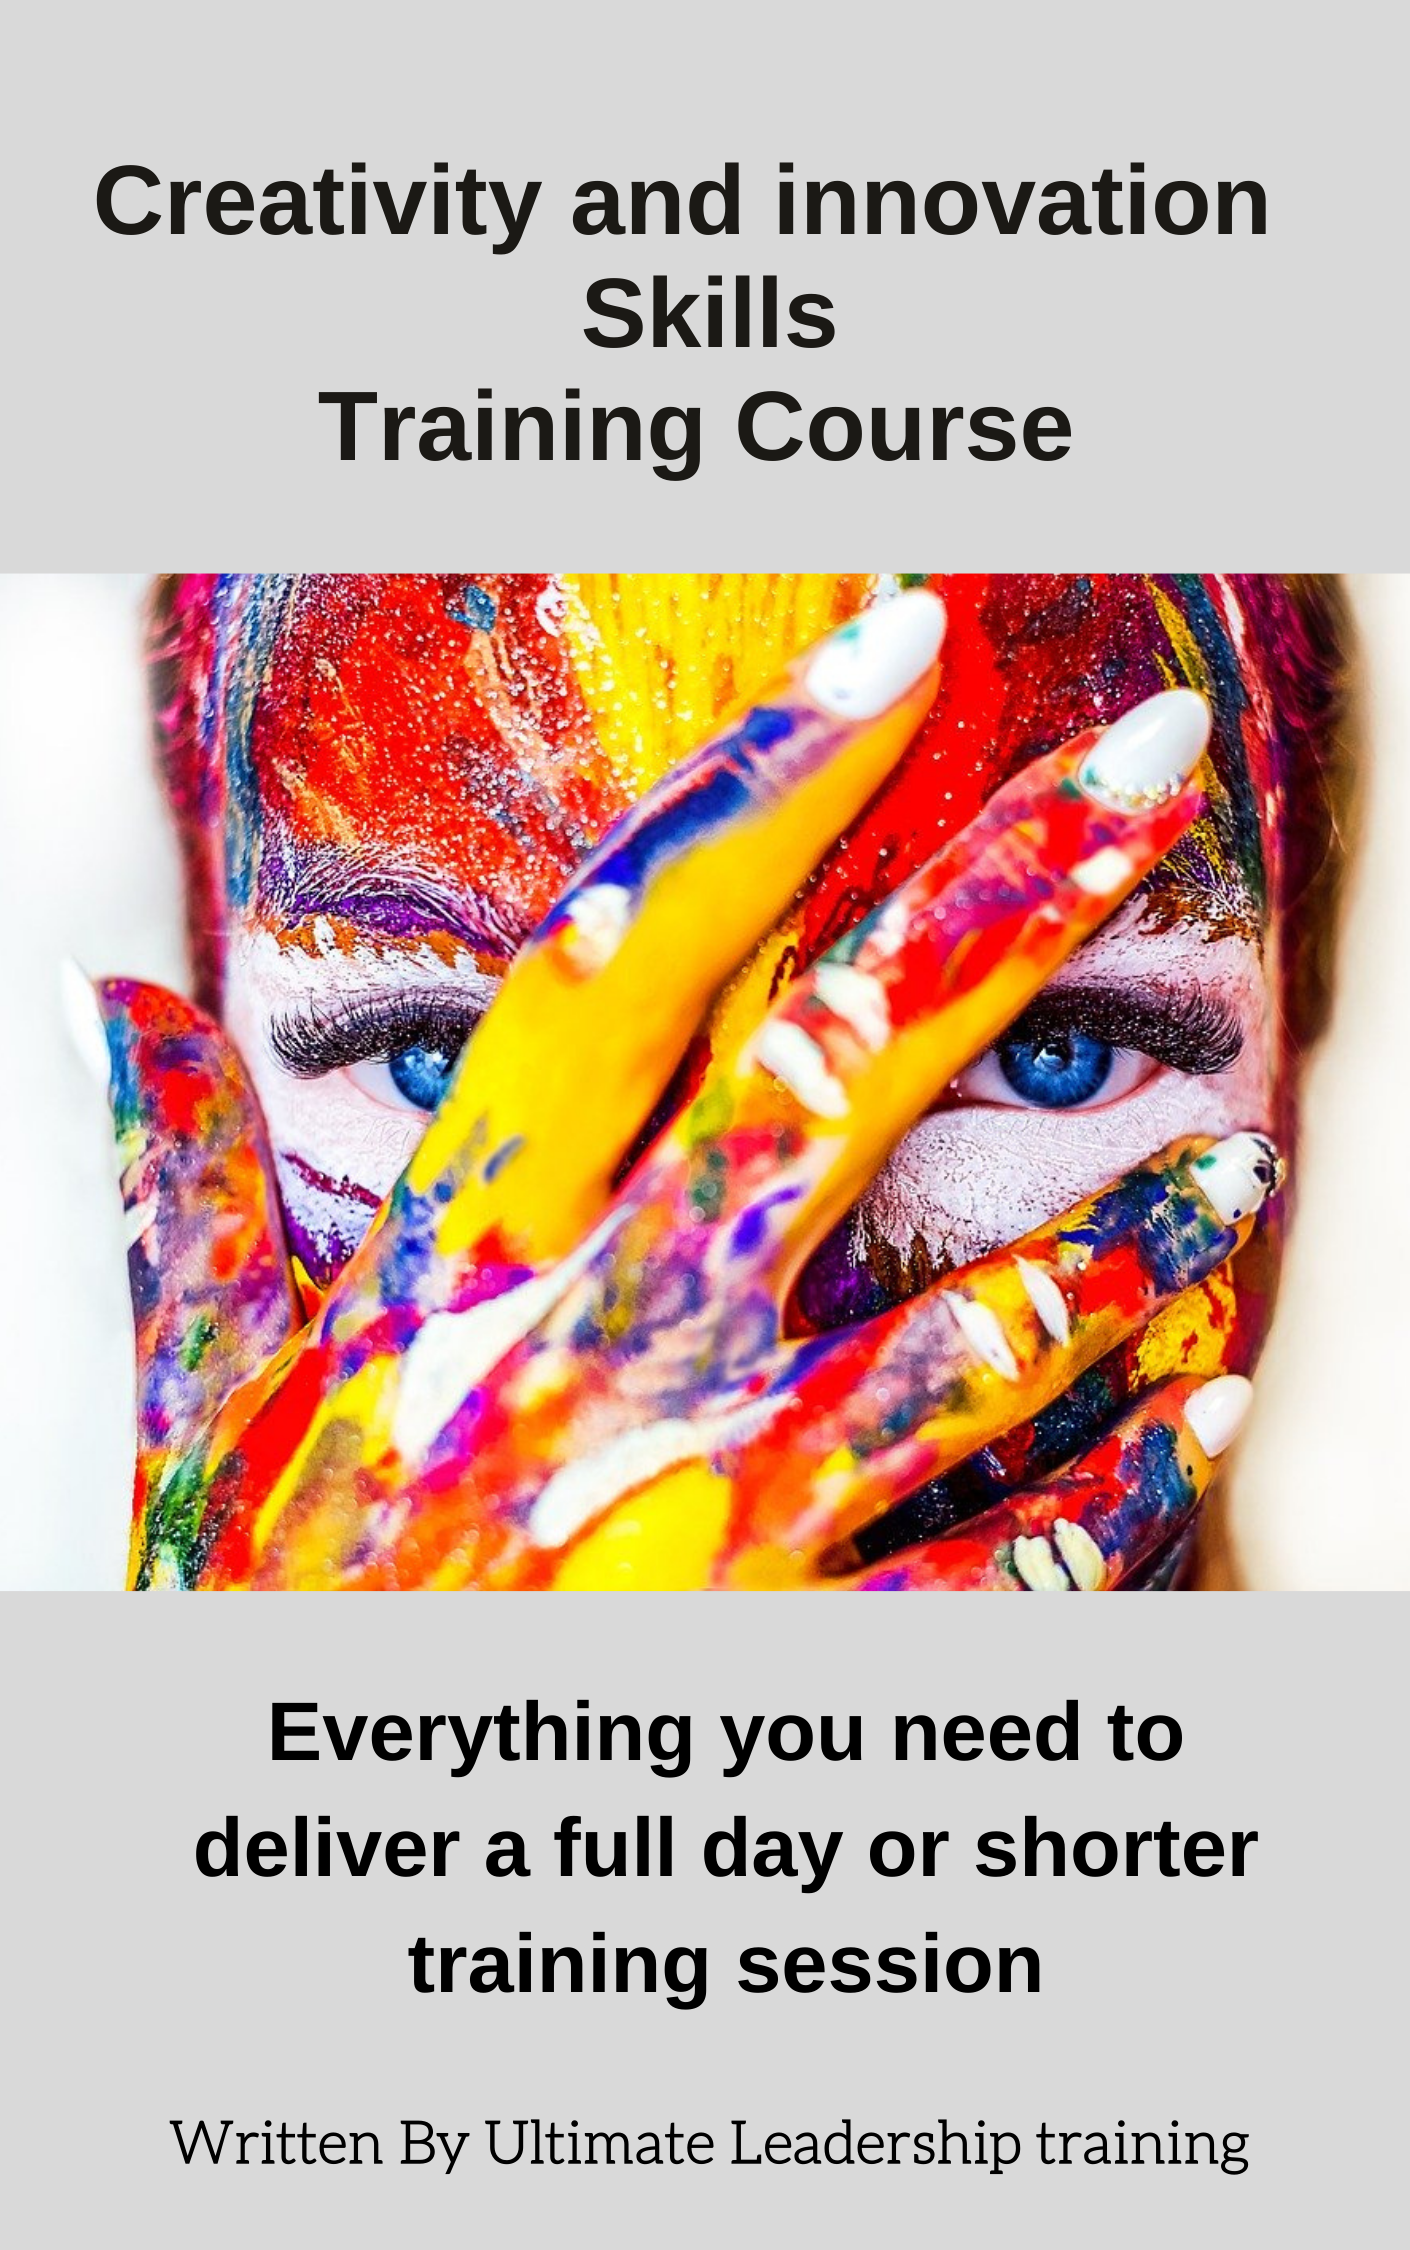 Buy the creativity and innovation skills training course and deliver it yourself. Pre written successful training course for sale